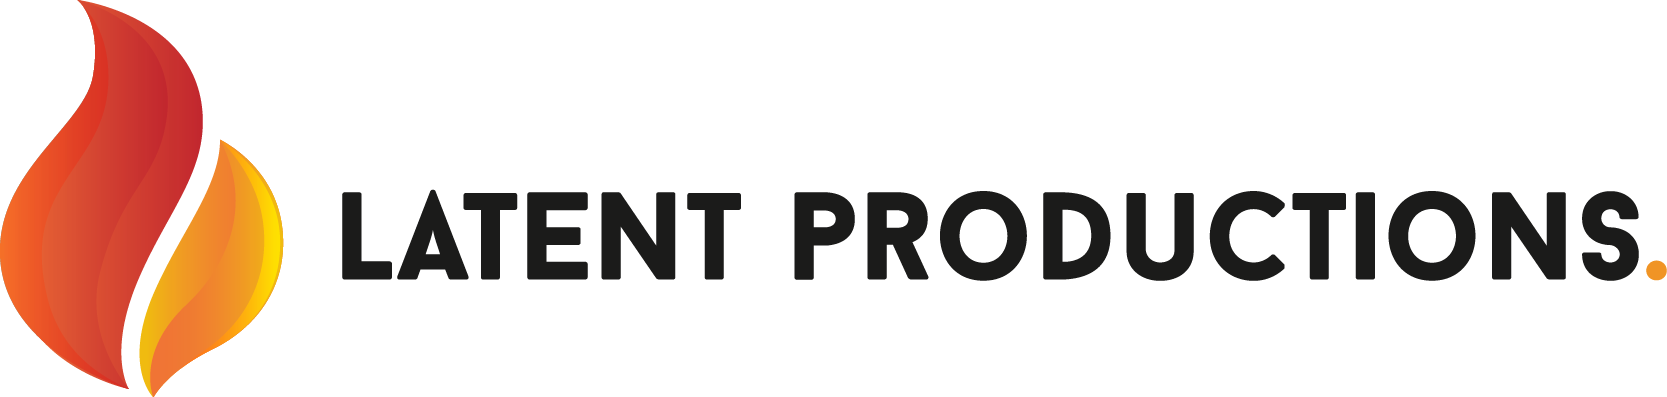 Video Production Toronto | Latent Productions | Video Production Company